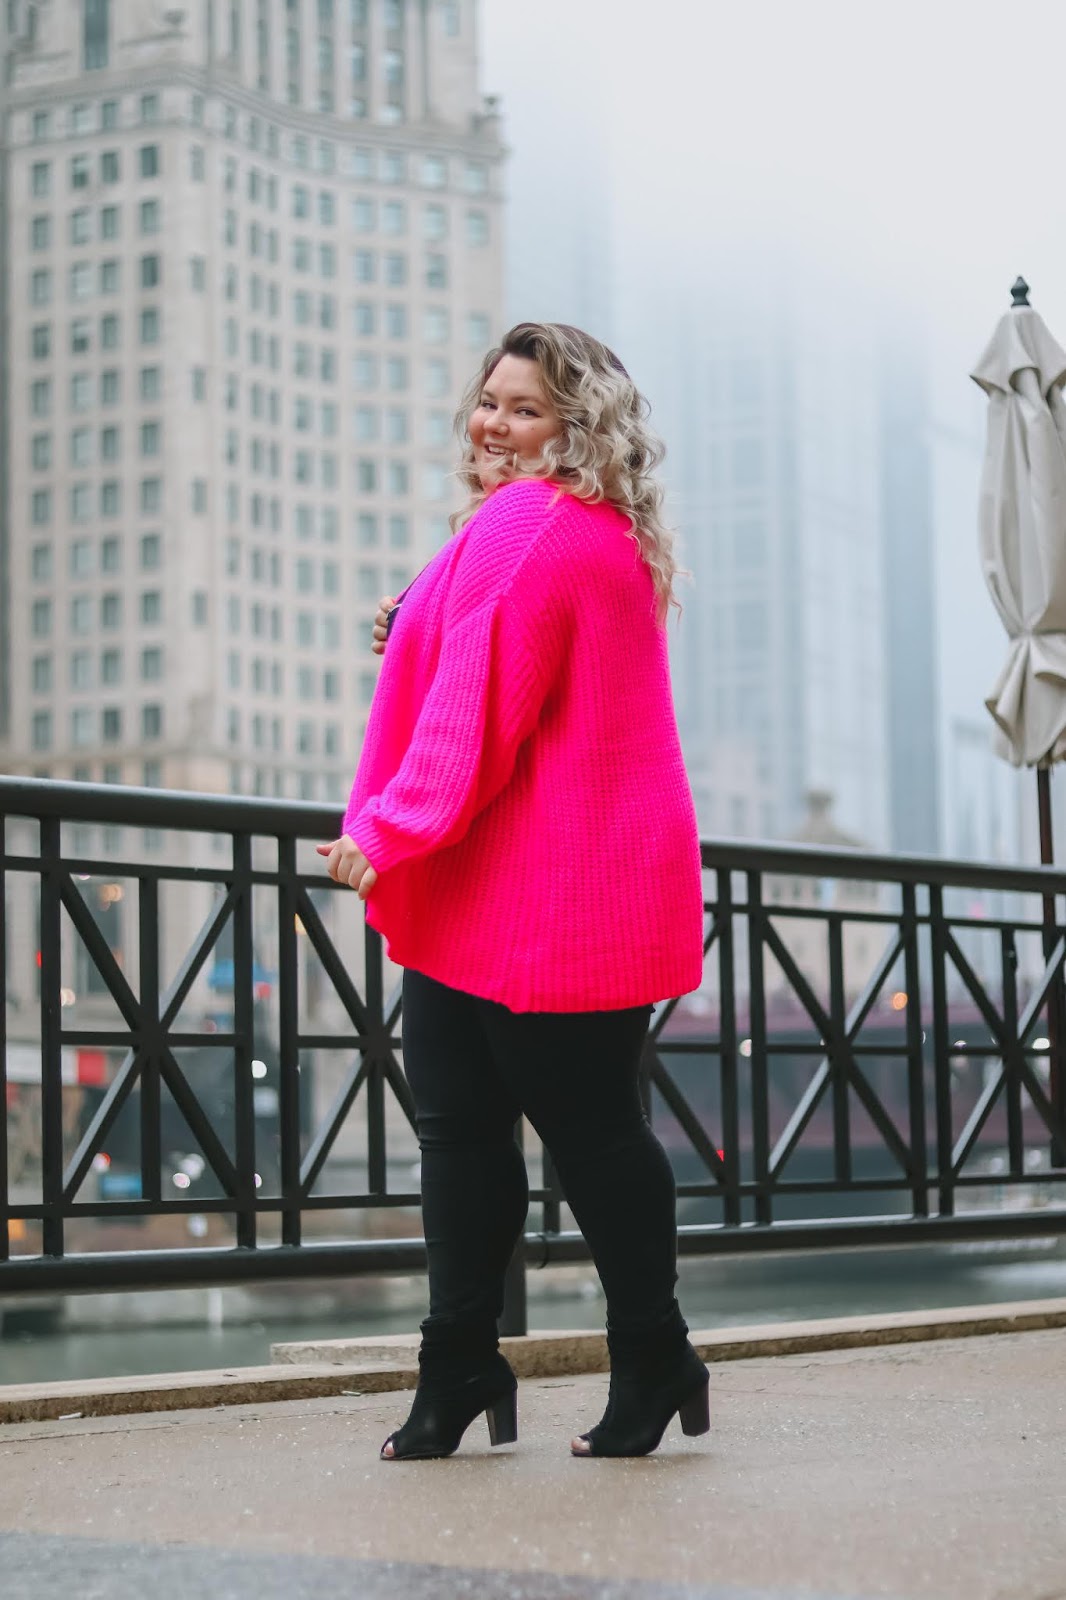 Chicago Plus Size Petite Fashion Blogger Natalie in the City shops for budget friendly clothing at Gordmans.